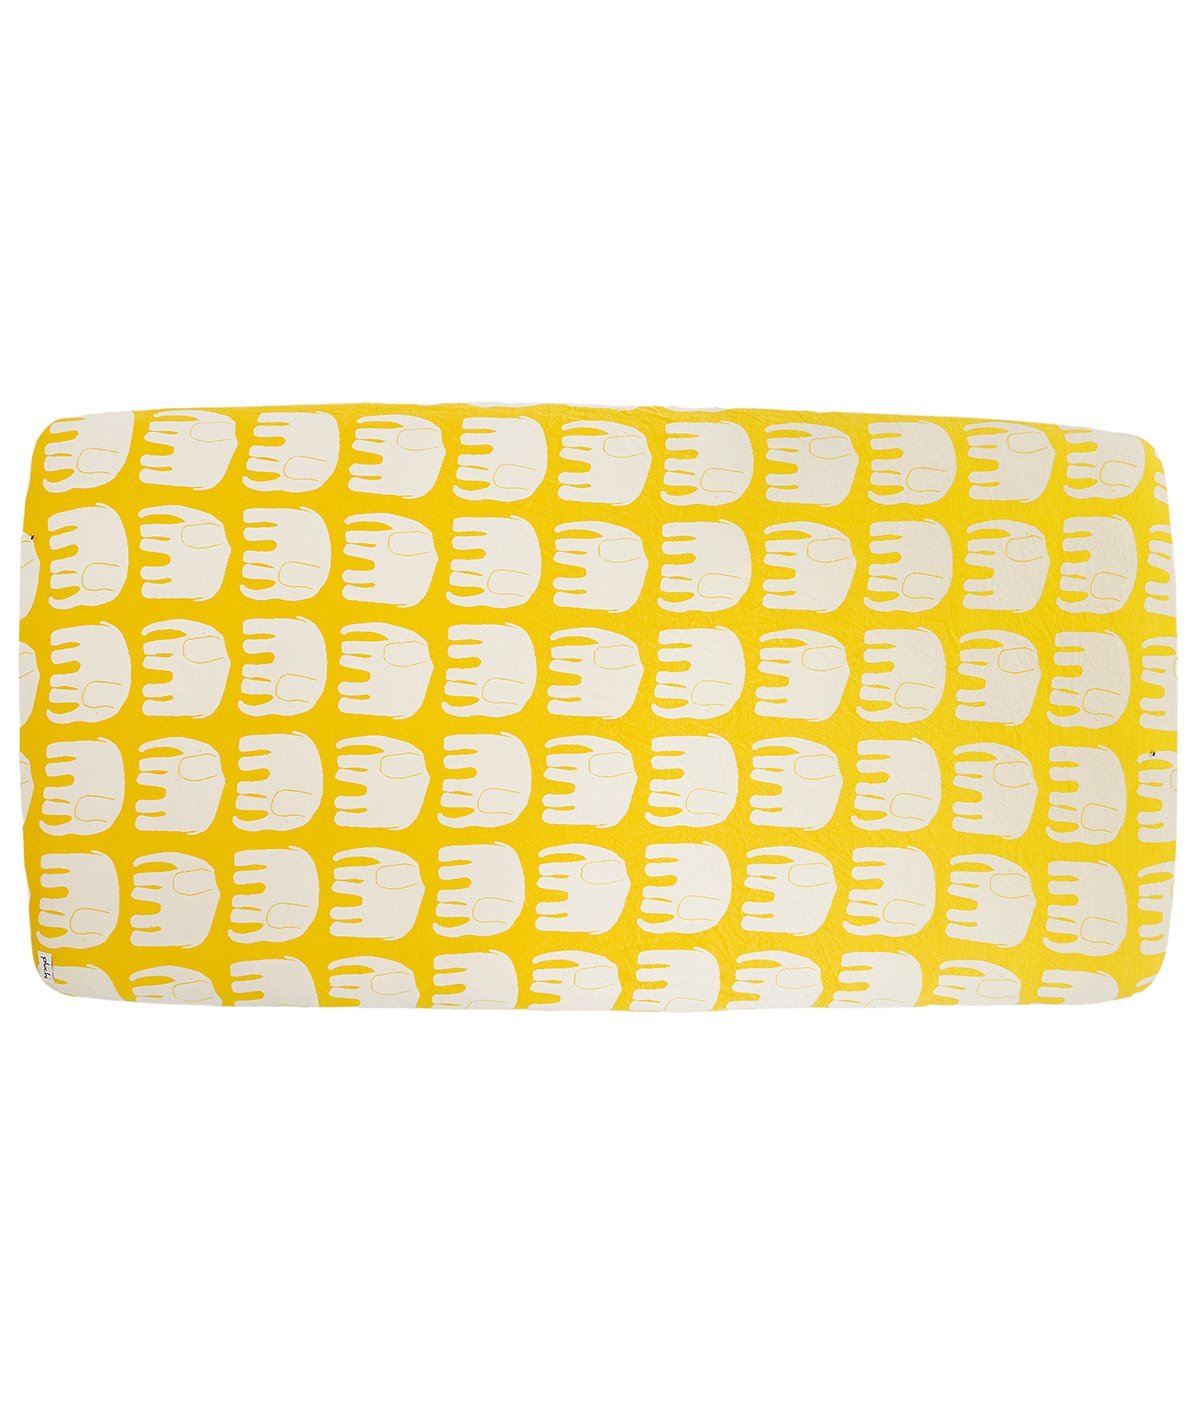 Elephant Yellow Cotton Knitted Cot Sheet & Pillow Set for Babies